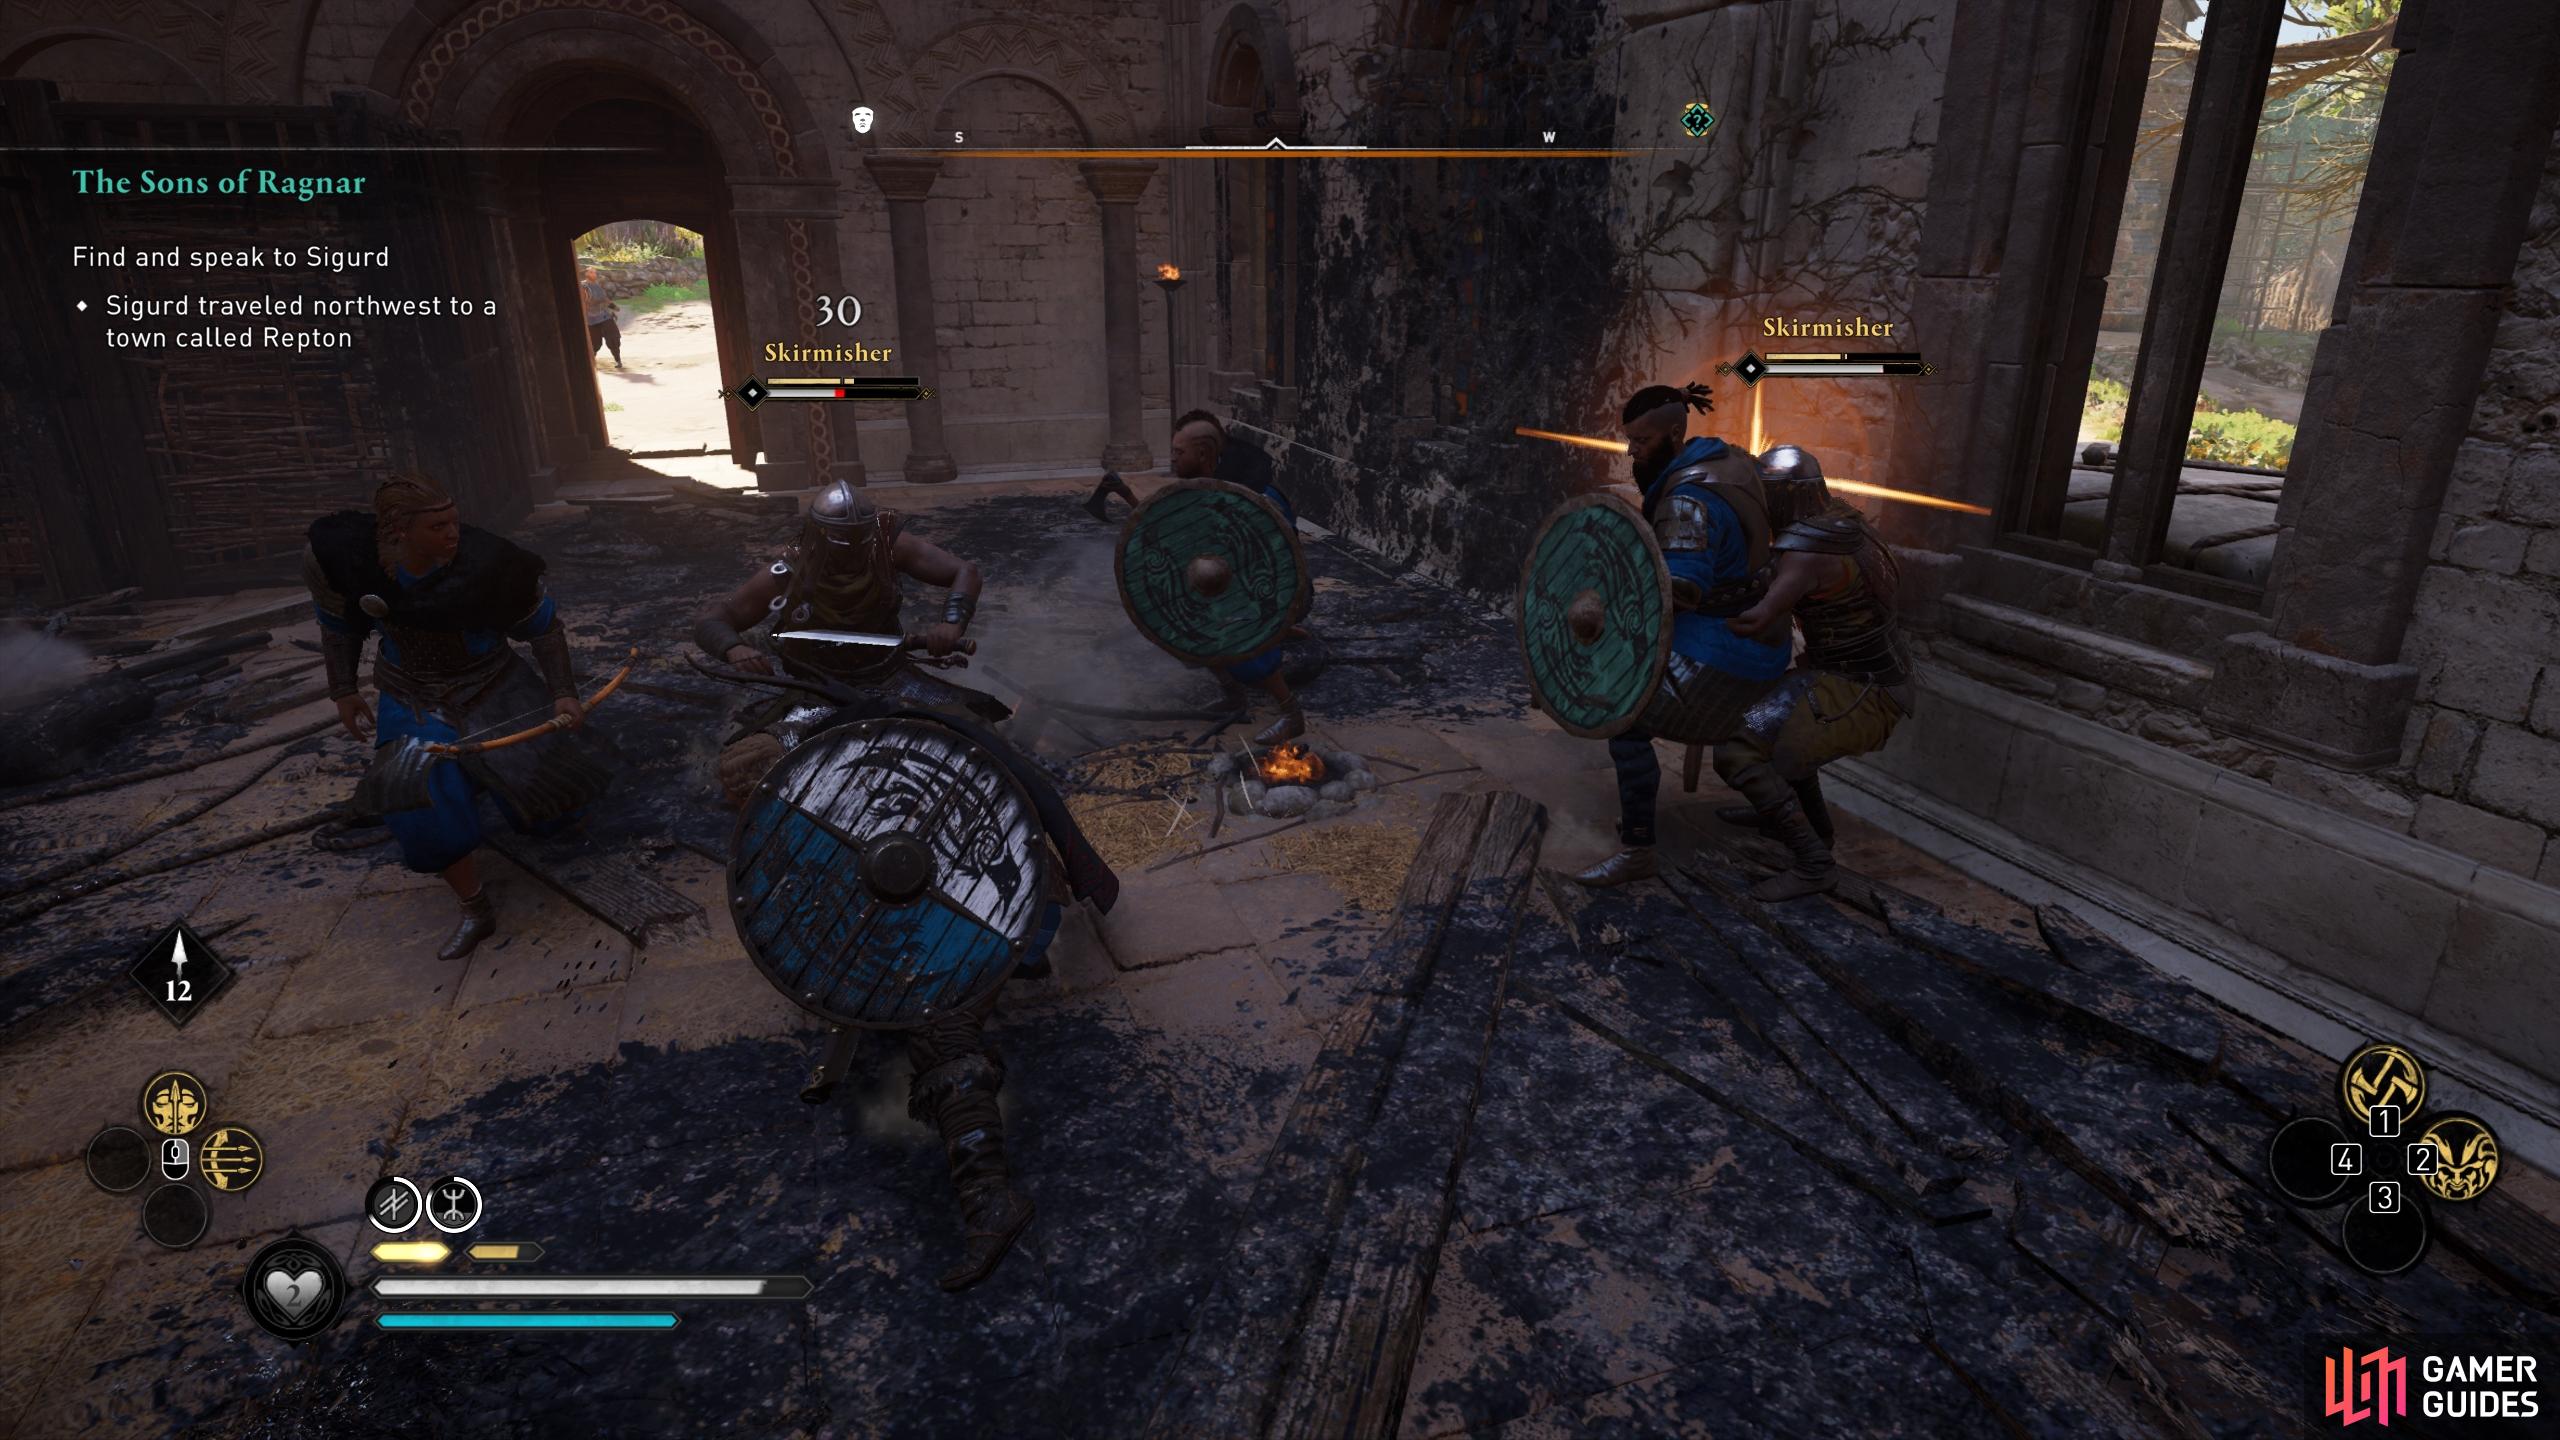 Release the elite warriors in the cages to help fight the skirmishers.